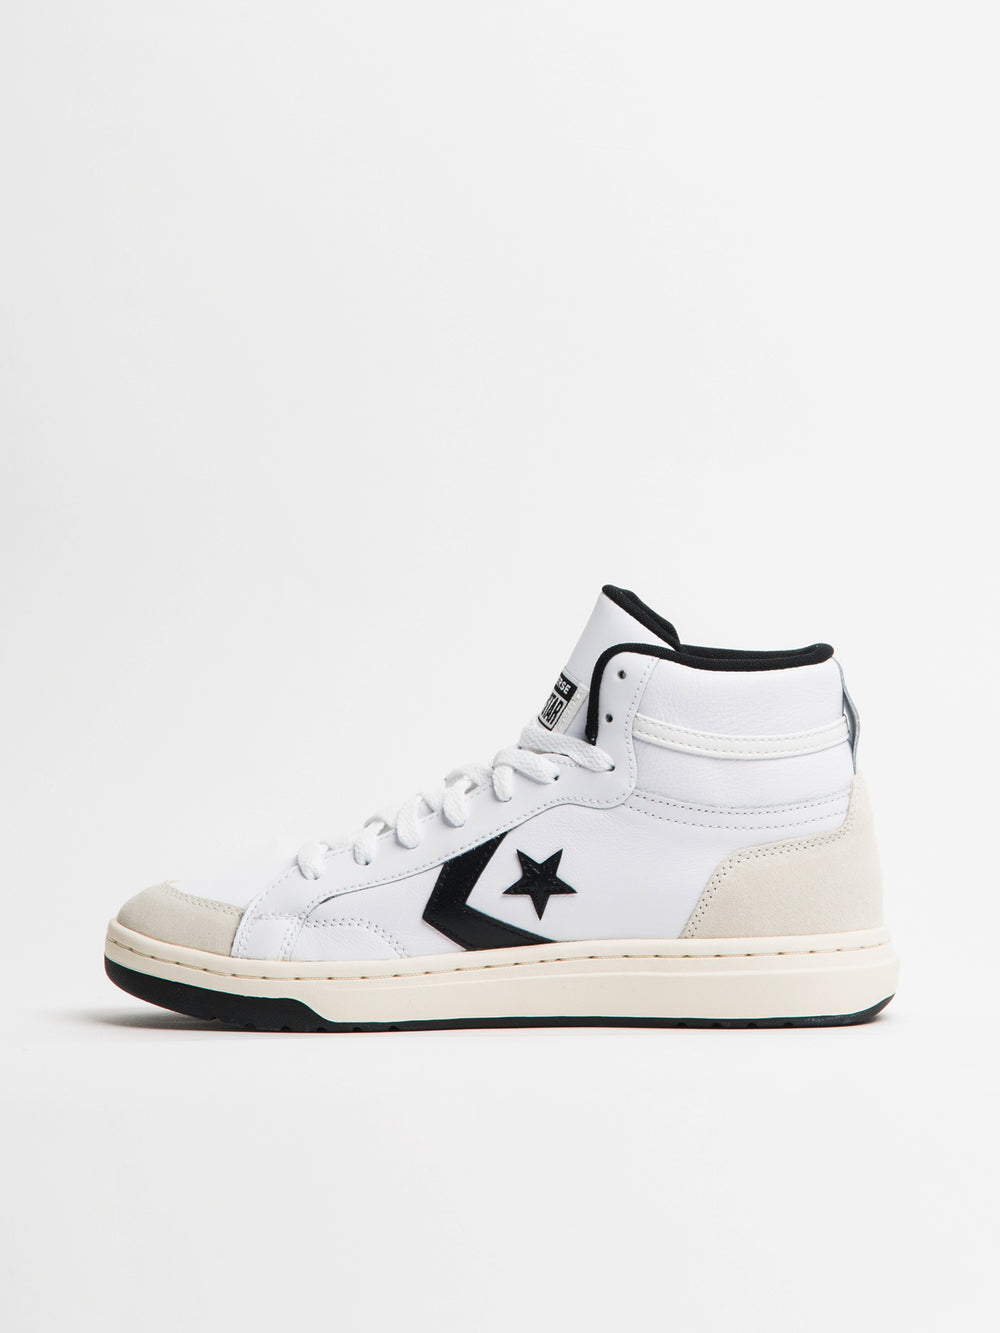 Men's Classic High Top | Off-White